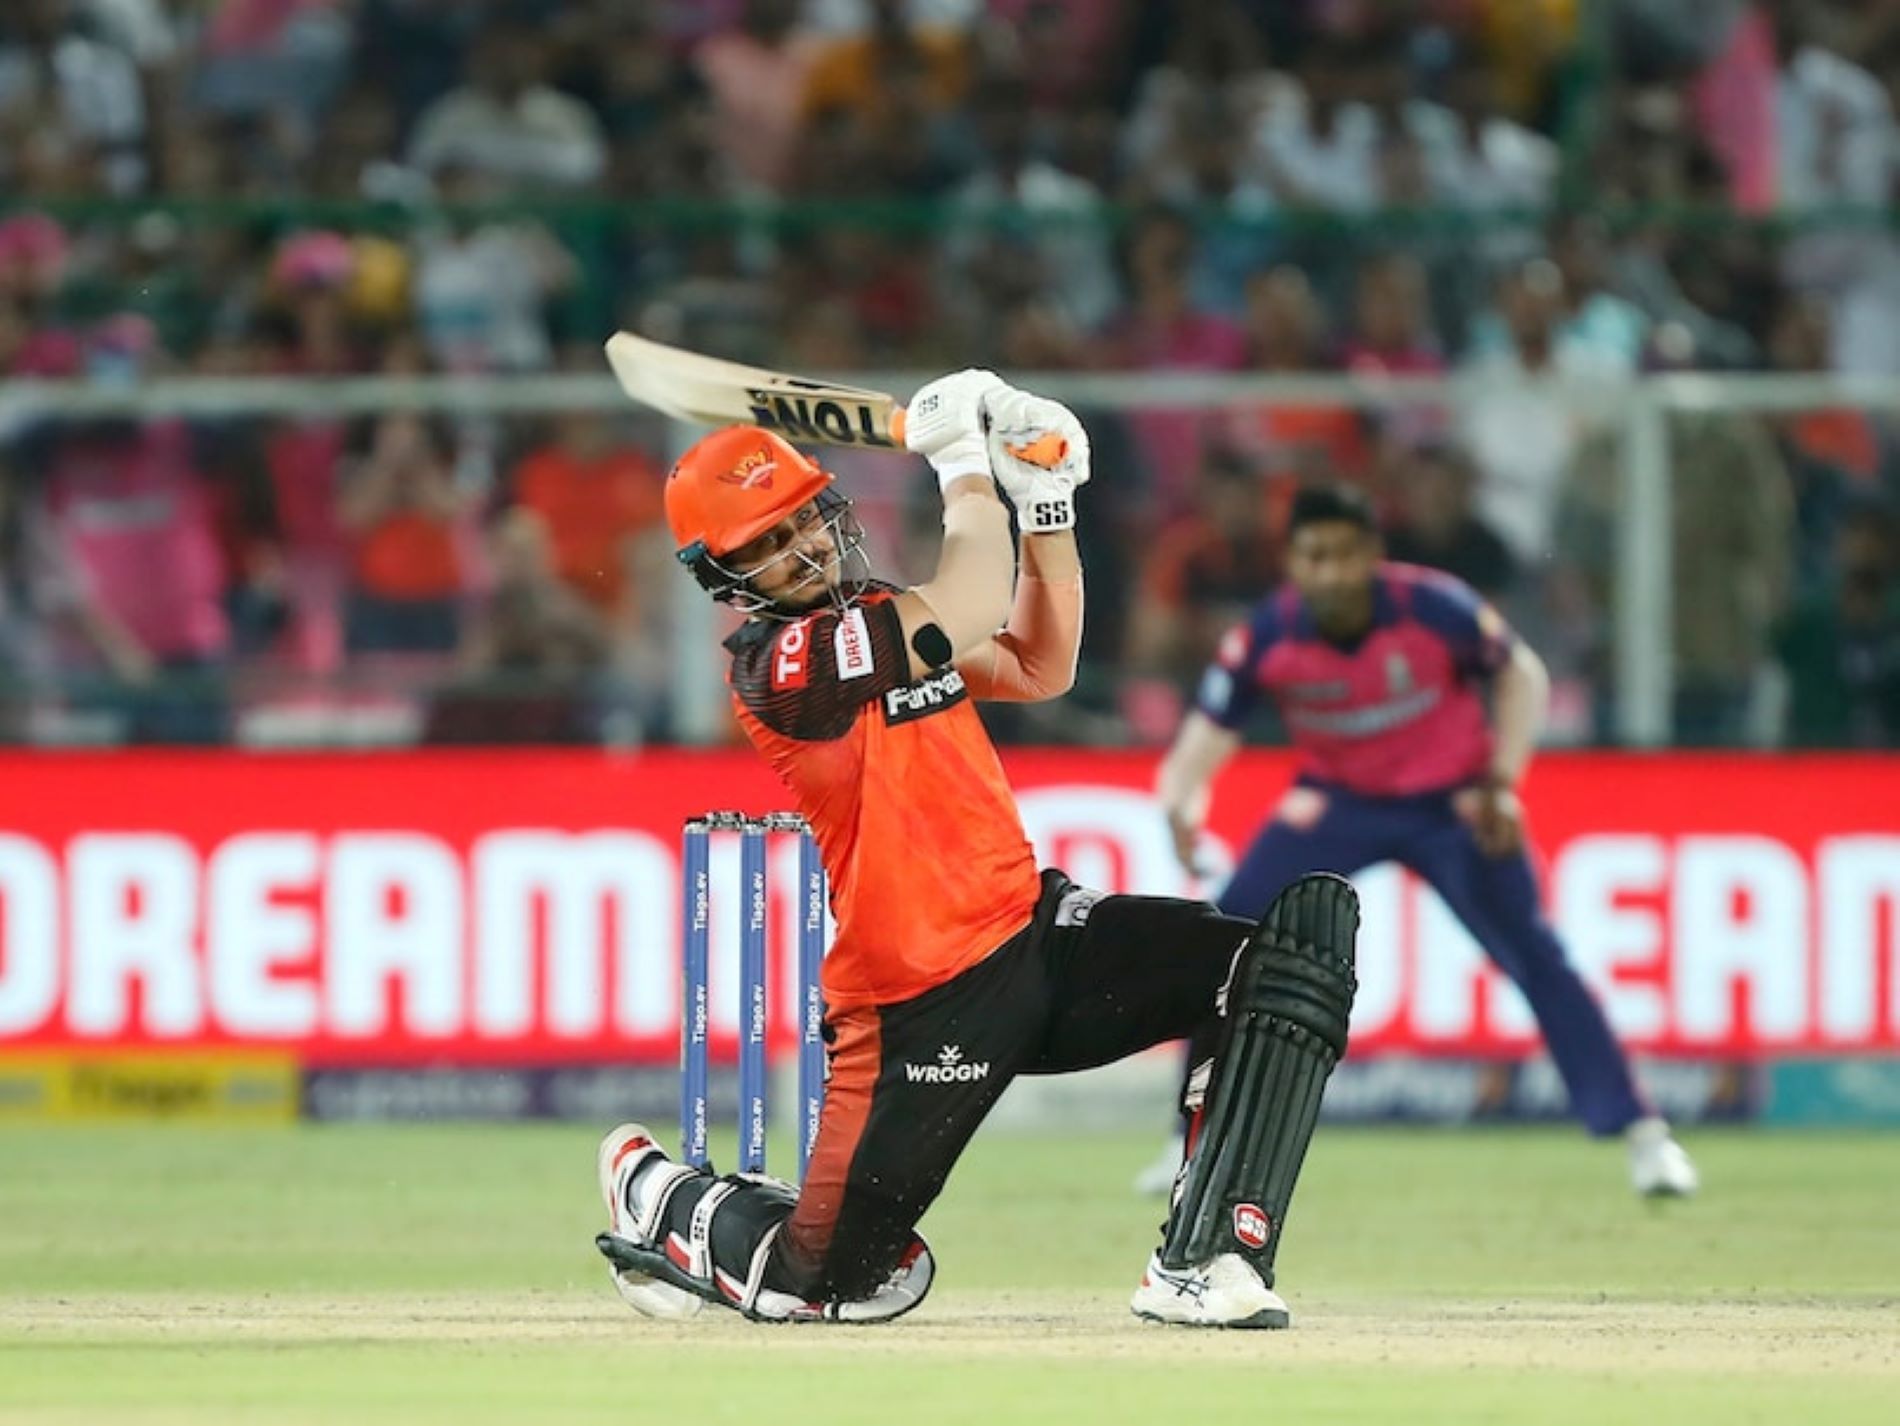 Abdul Samad hit a straight six off the last ball to seal SRH a thrilling victory over RR